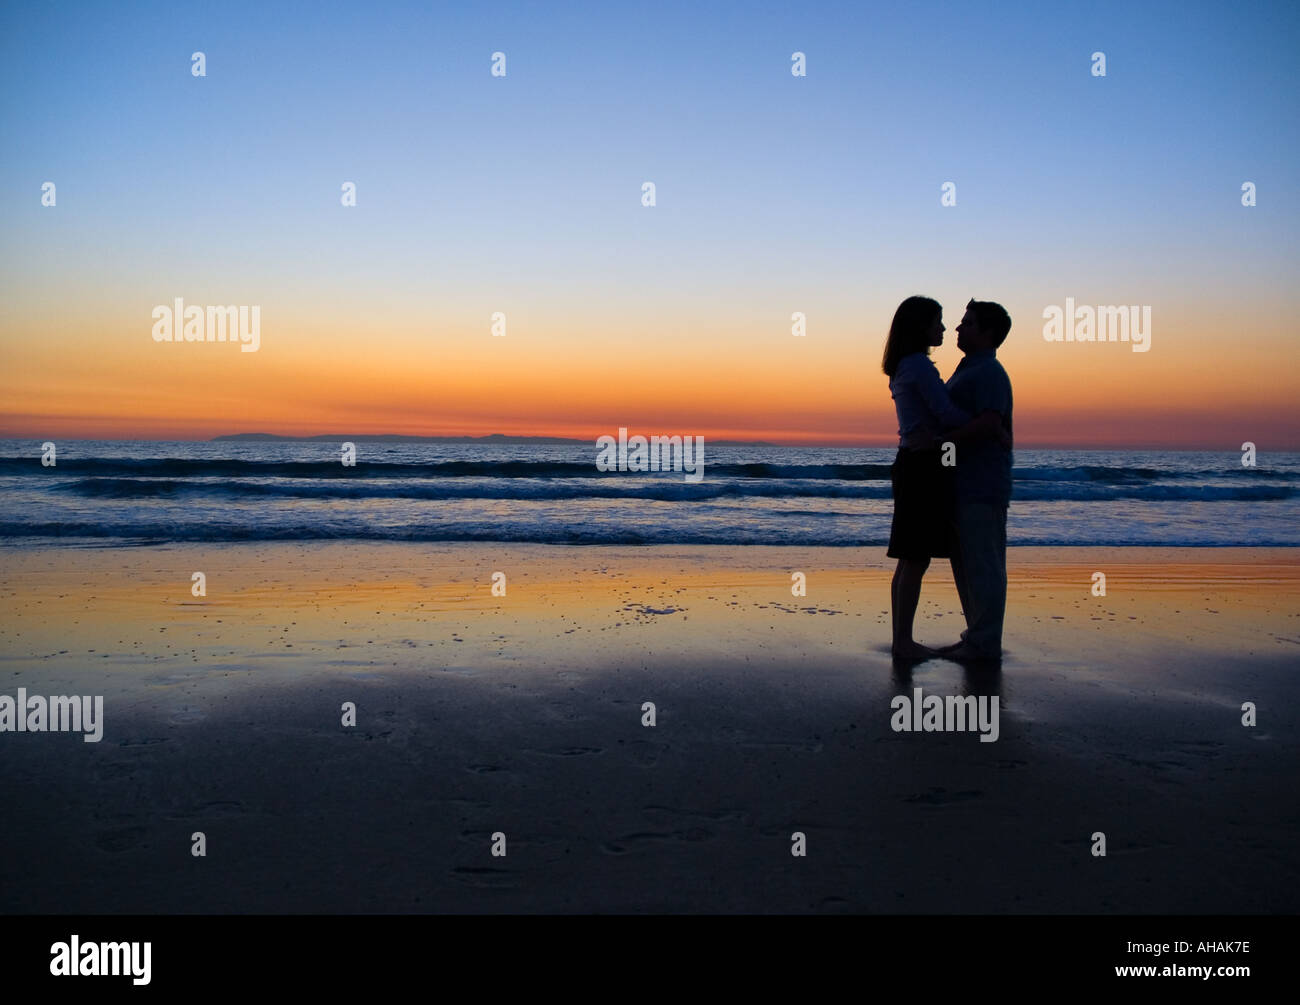 A romantic couple silhouetted by a glowing sunset on a beach Stock Photo